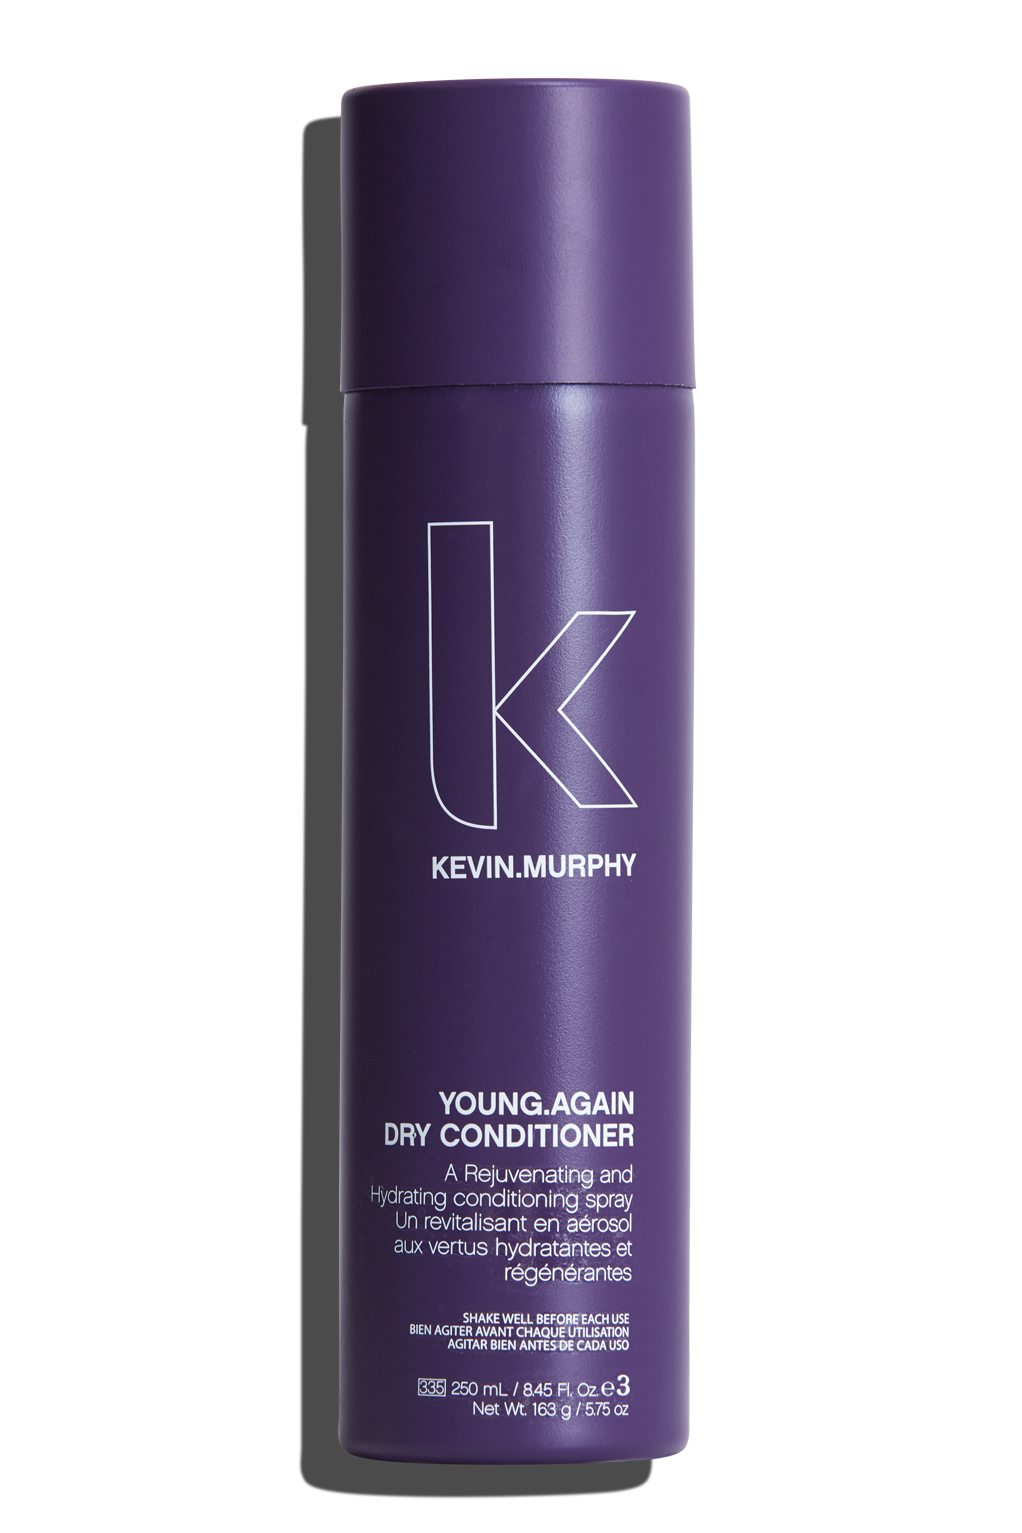 Kevin.Murphy YOUNG.AGAIN DRY CONDITIONER 100ml